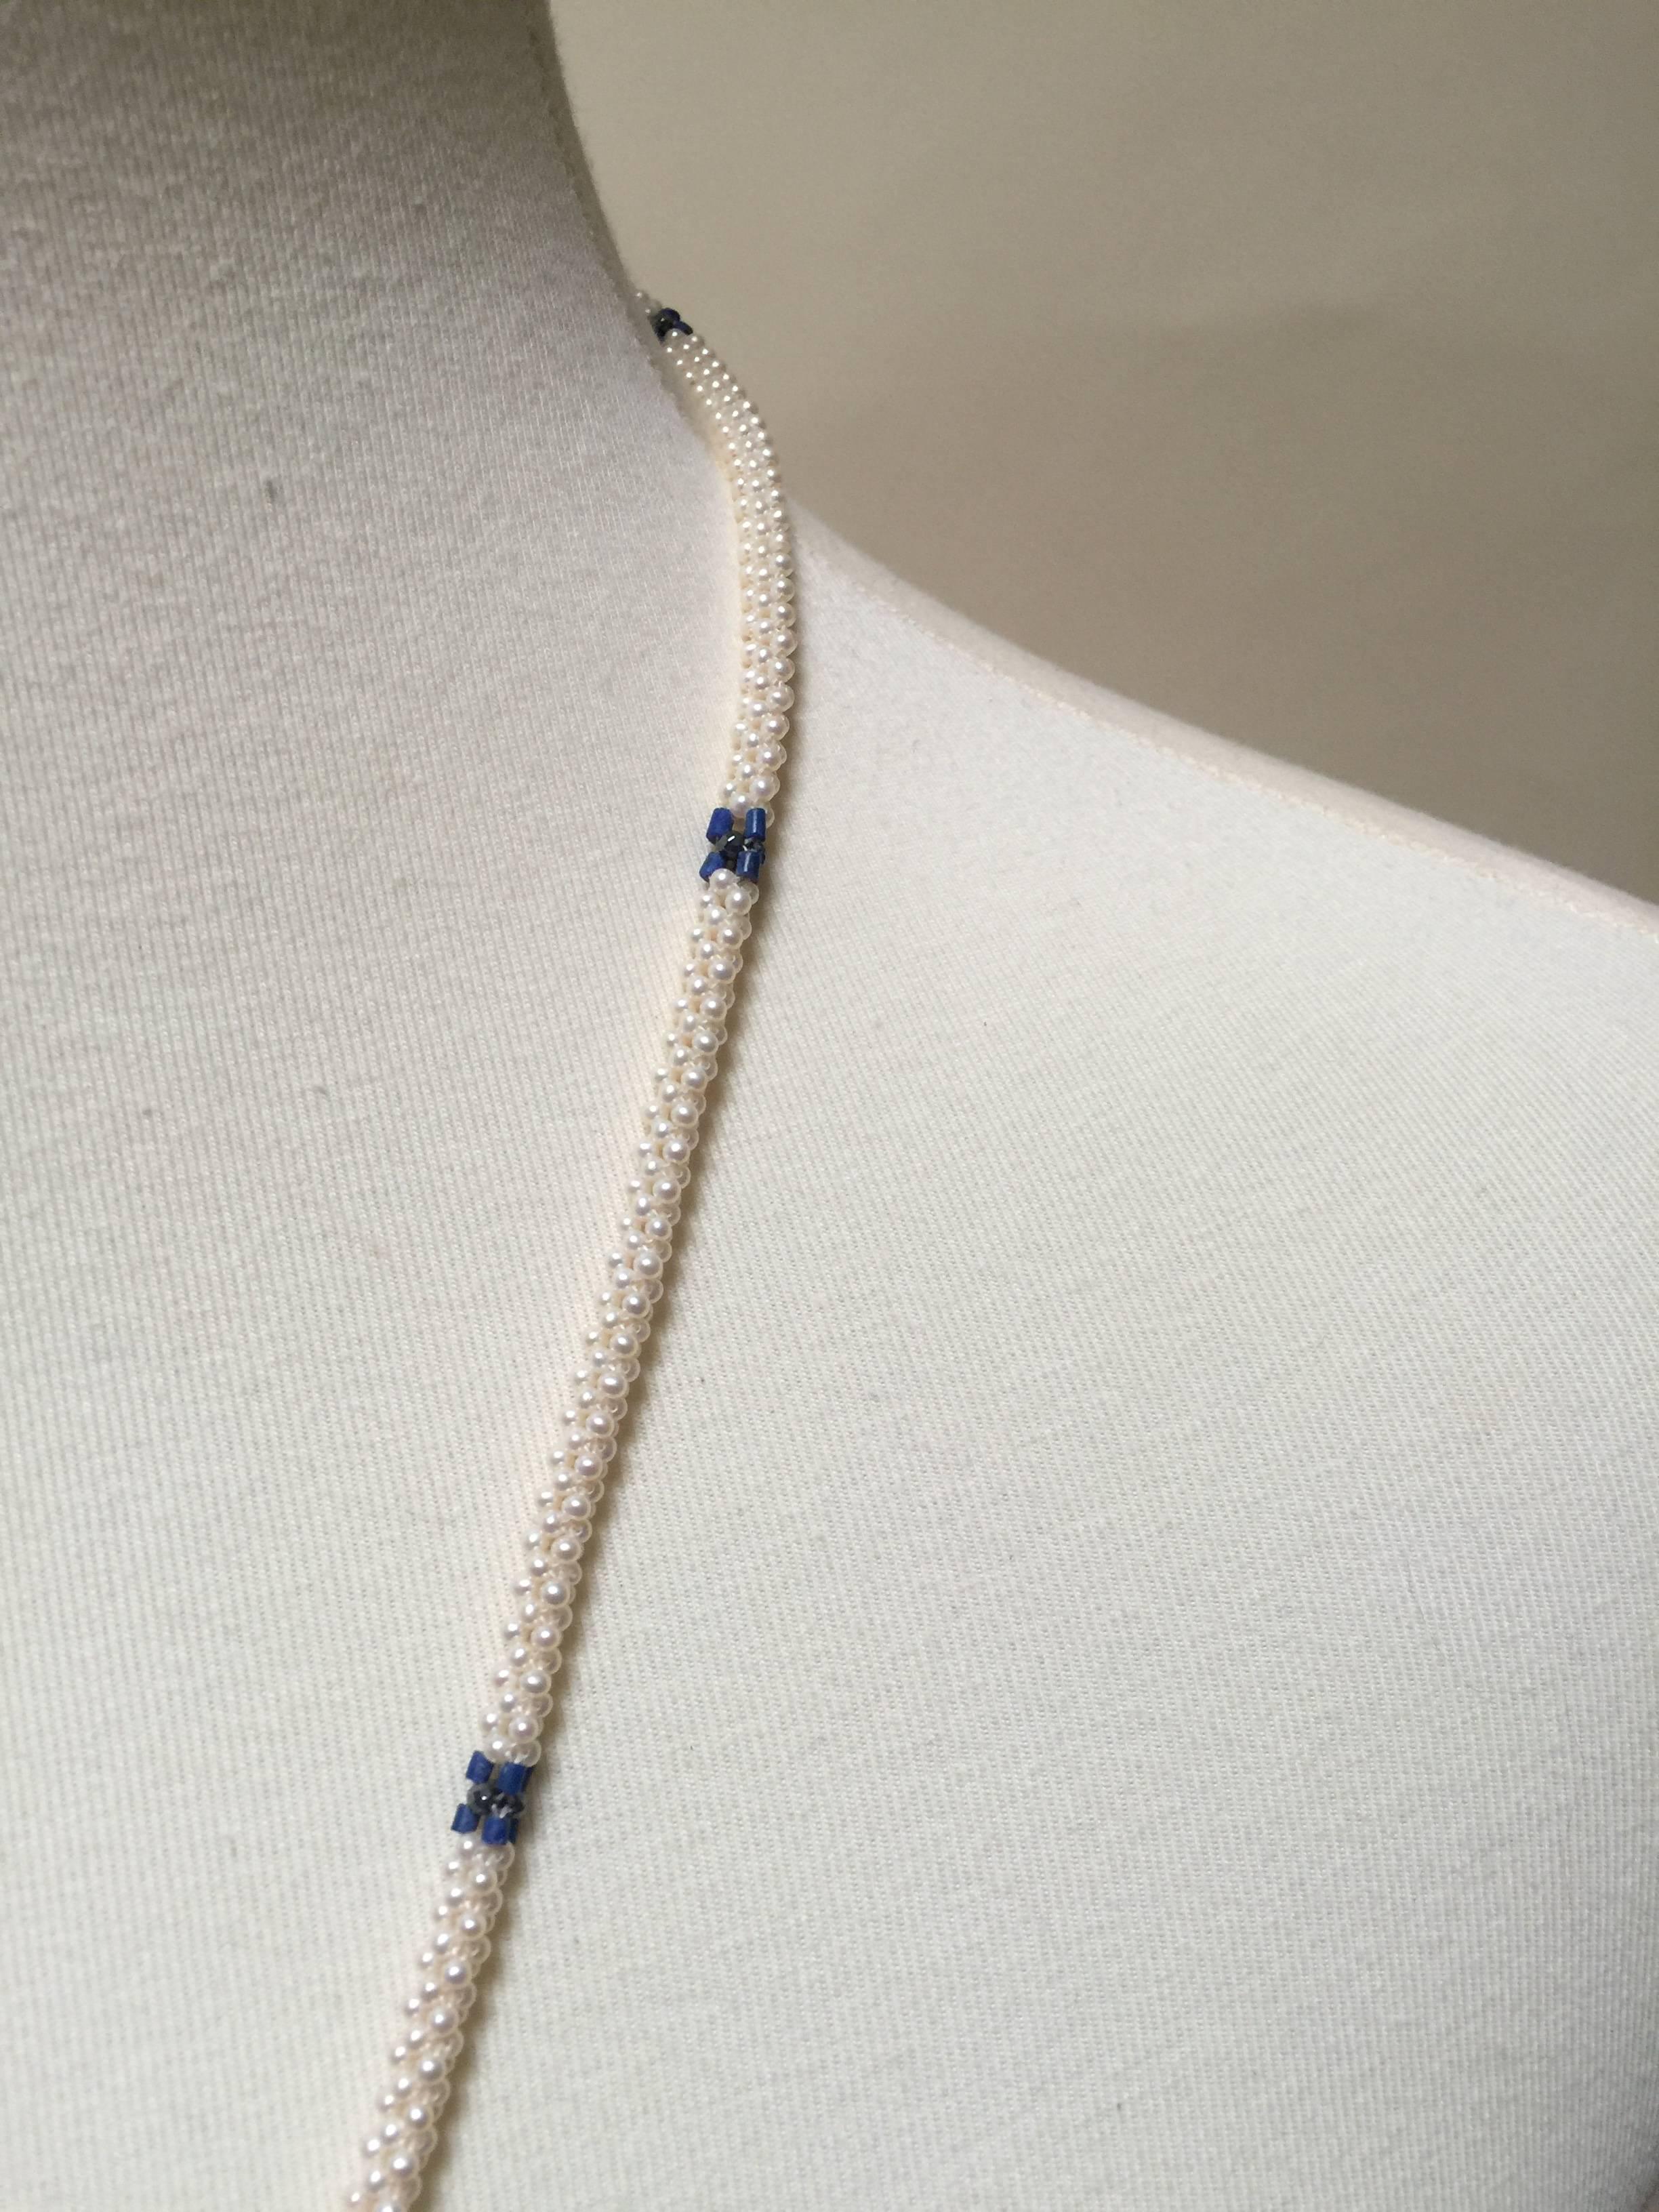 Marina J  Woven Long Pearl Necklace with Hand made Graduated Tassle with Enamel  1